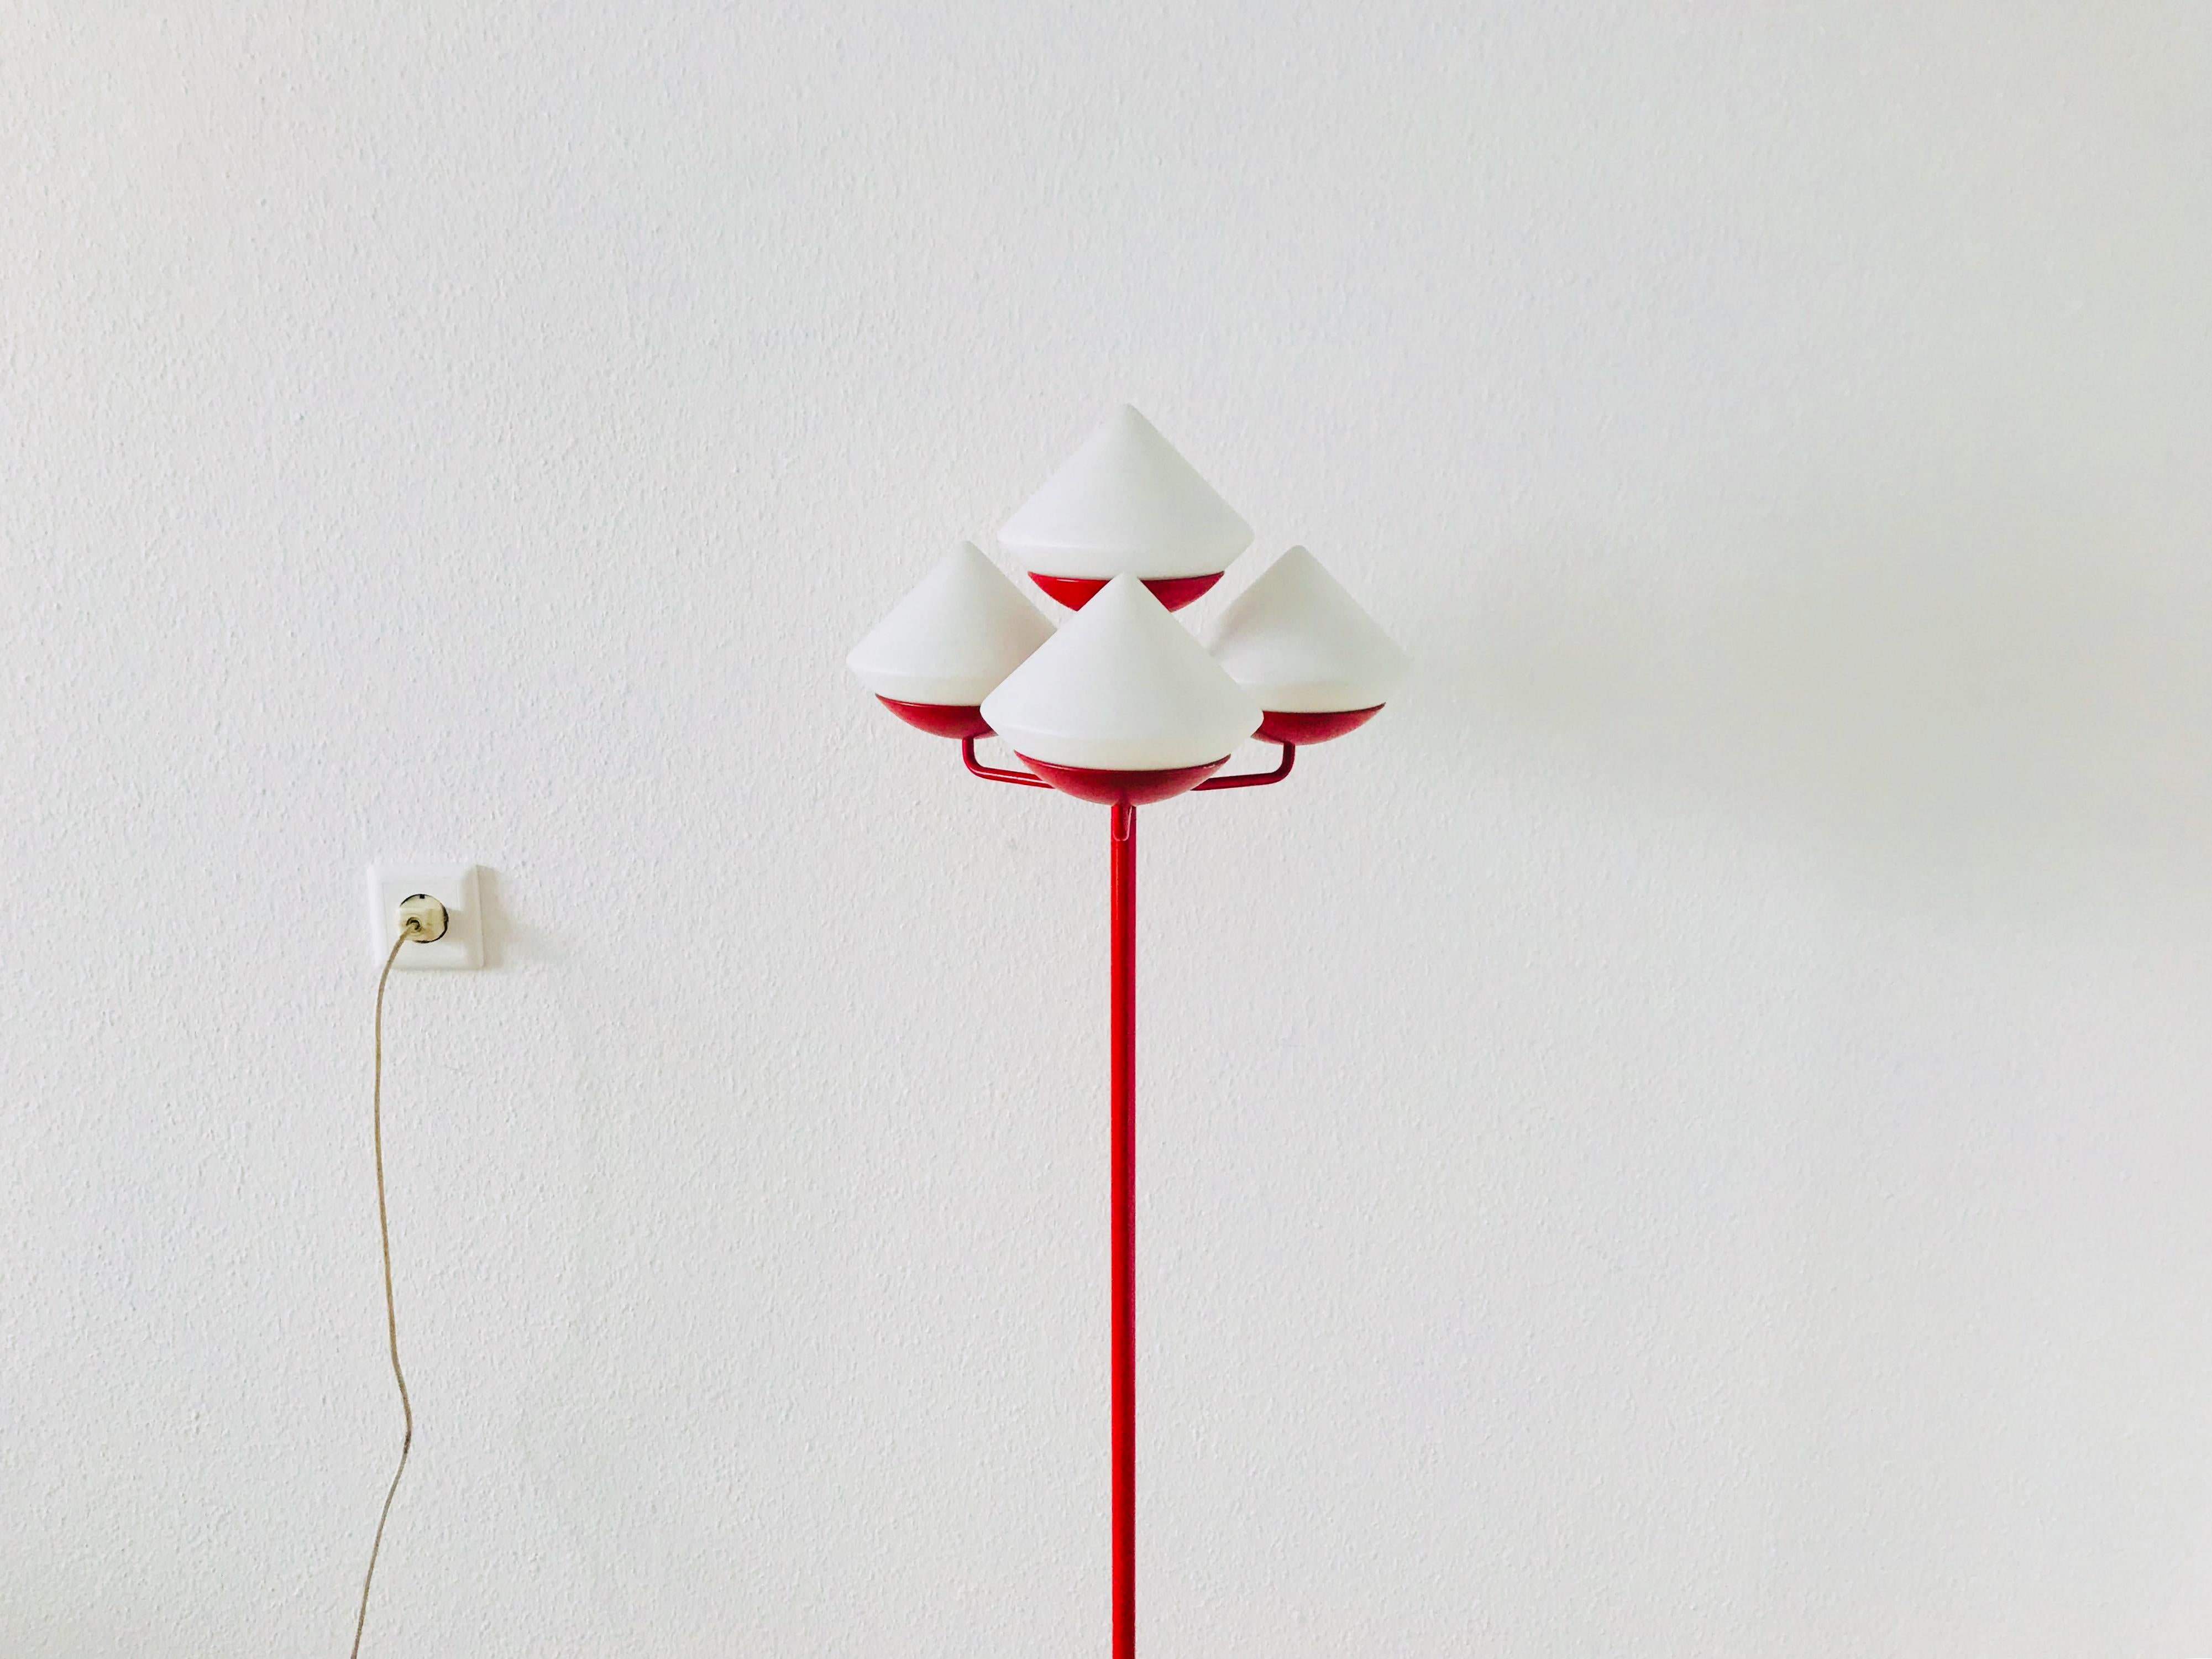 Mid-Century Modern Midcentury Red and White 4-Arm Space Age Floor Lamp Attributed to Kaiser, 1960s